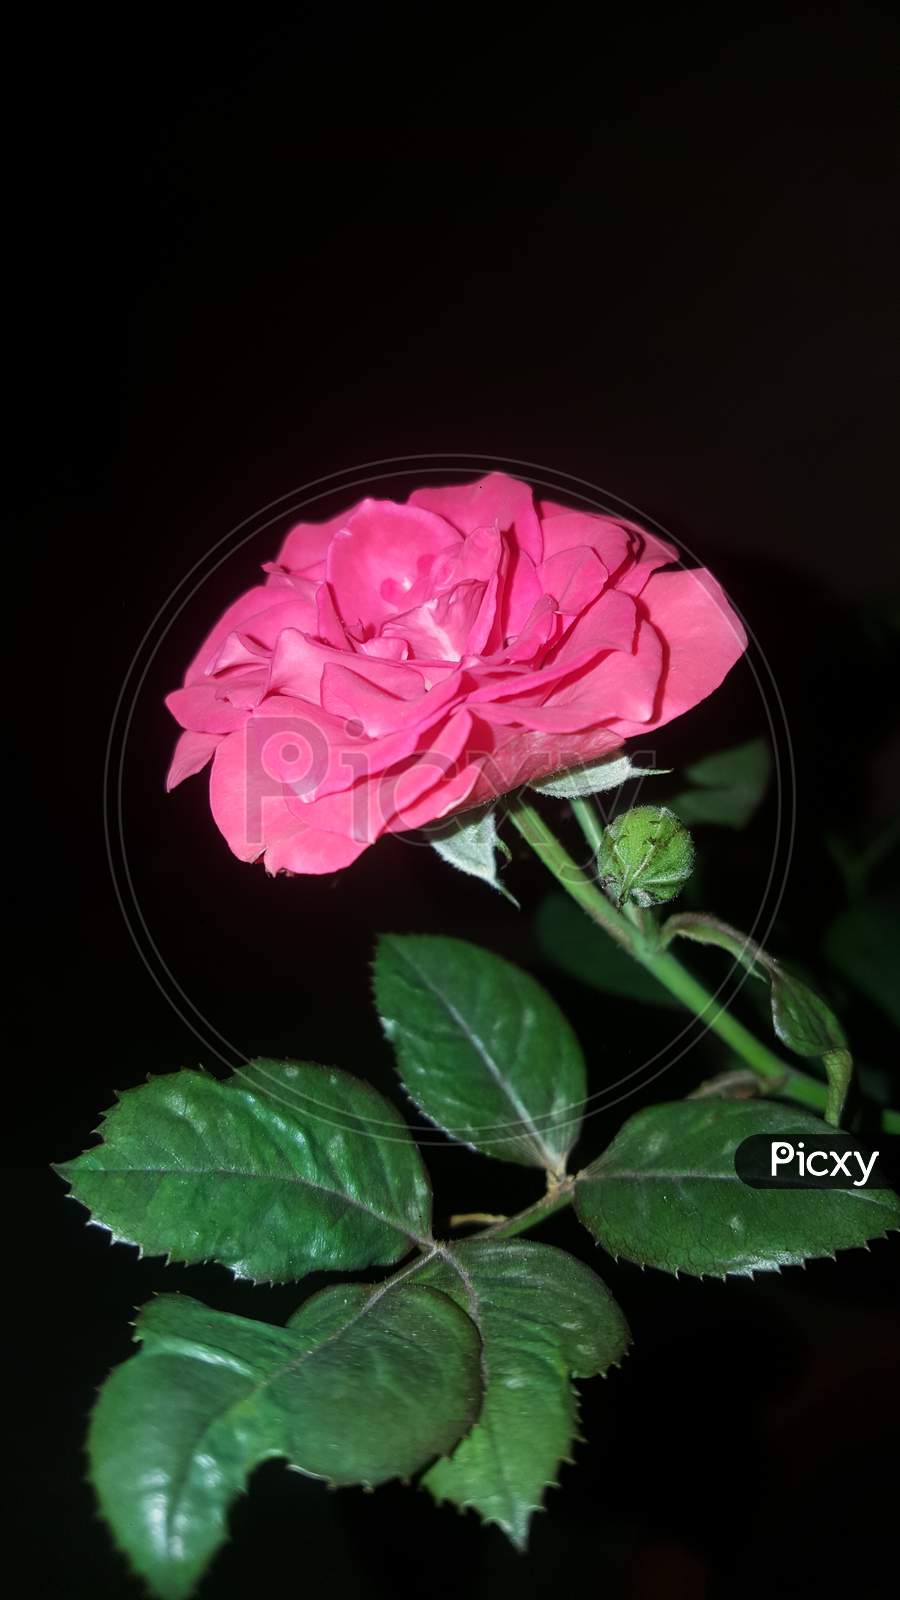 rose flowers isolated on black background with clipping path